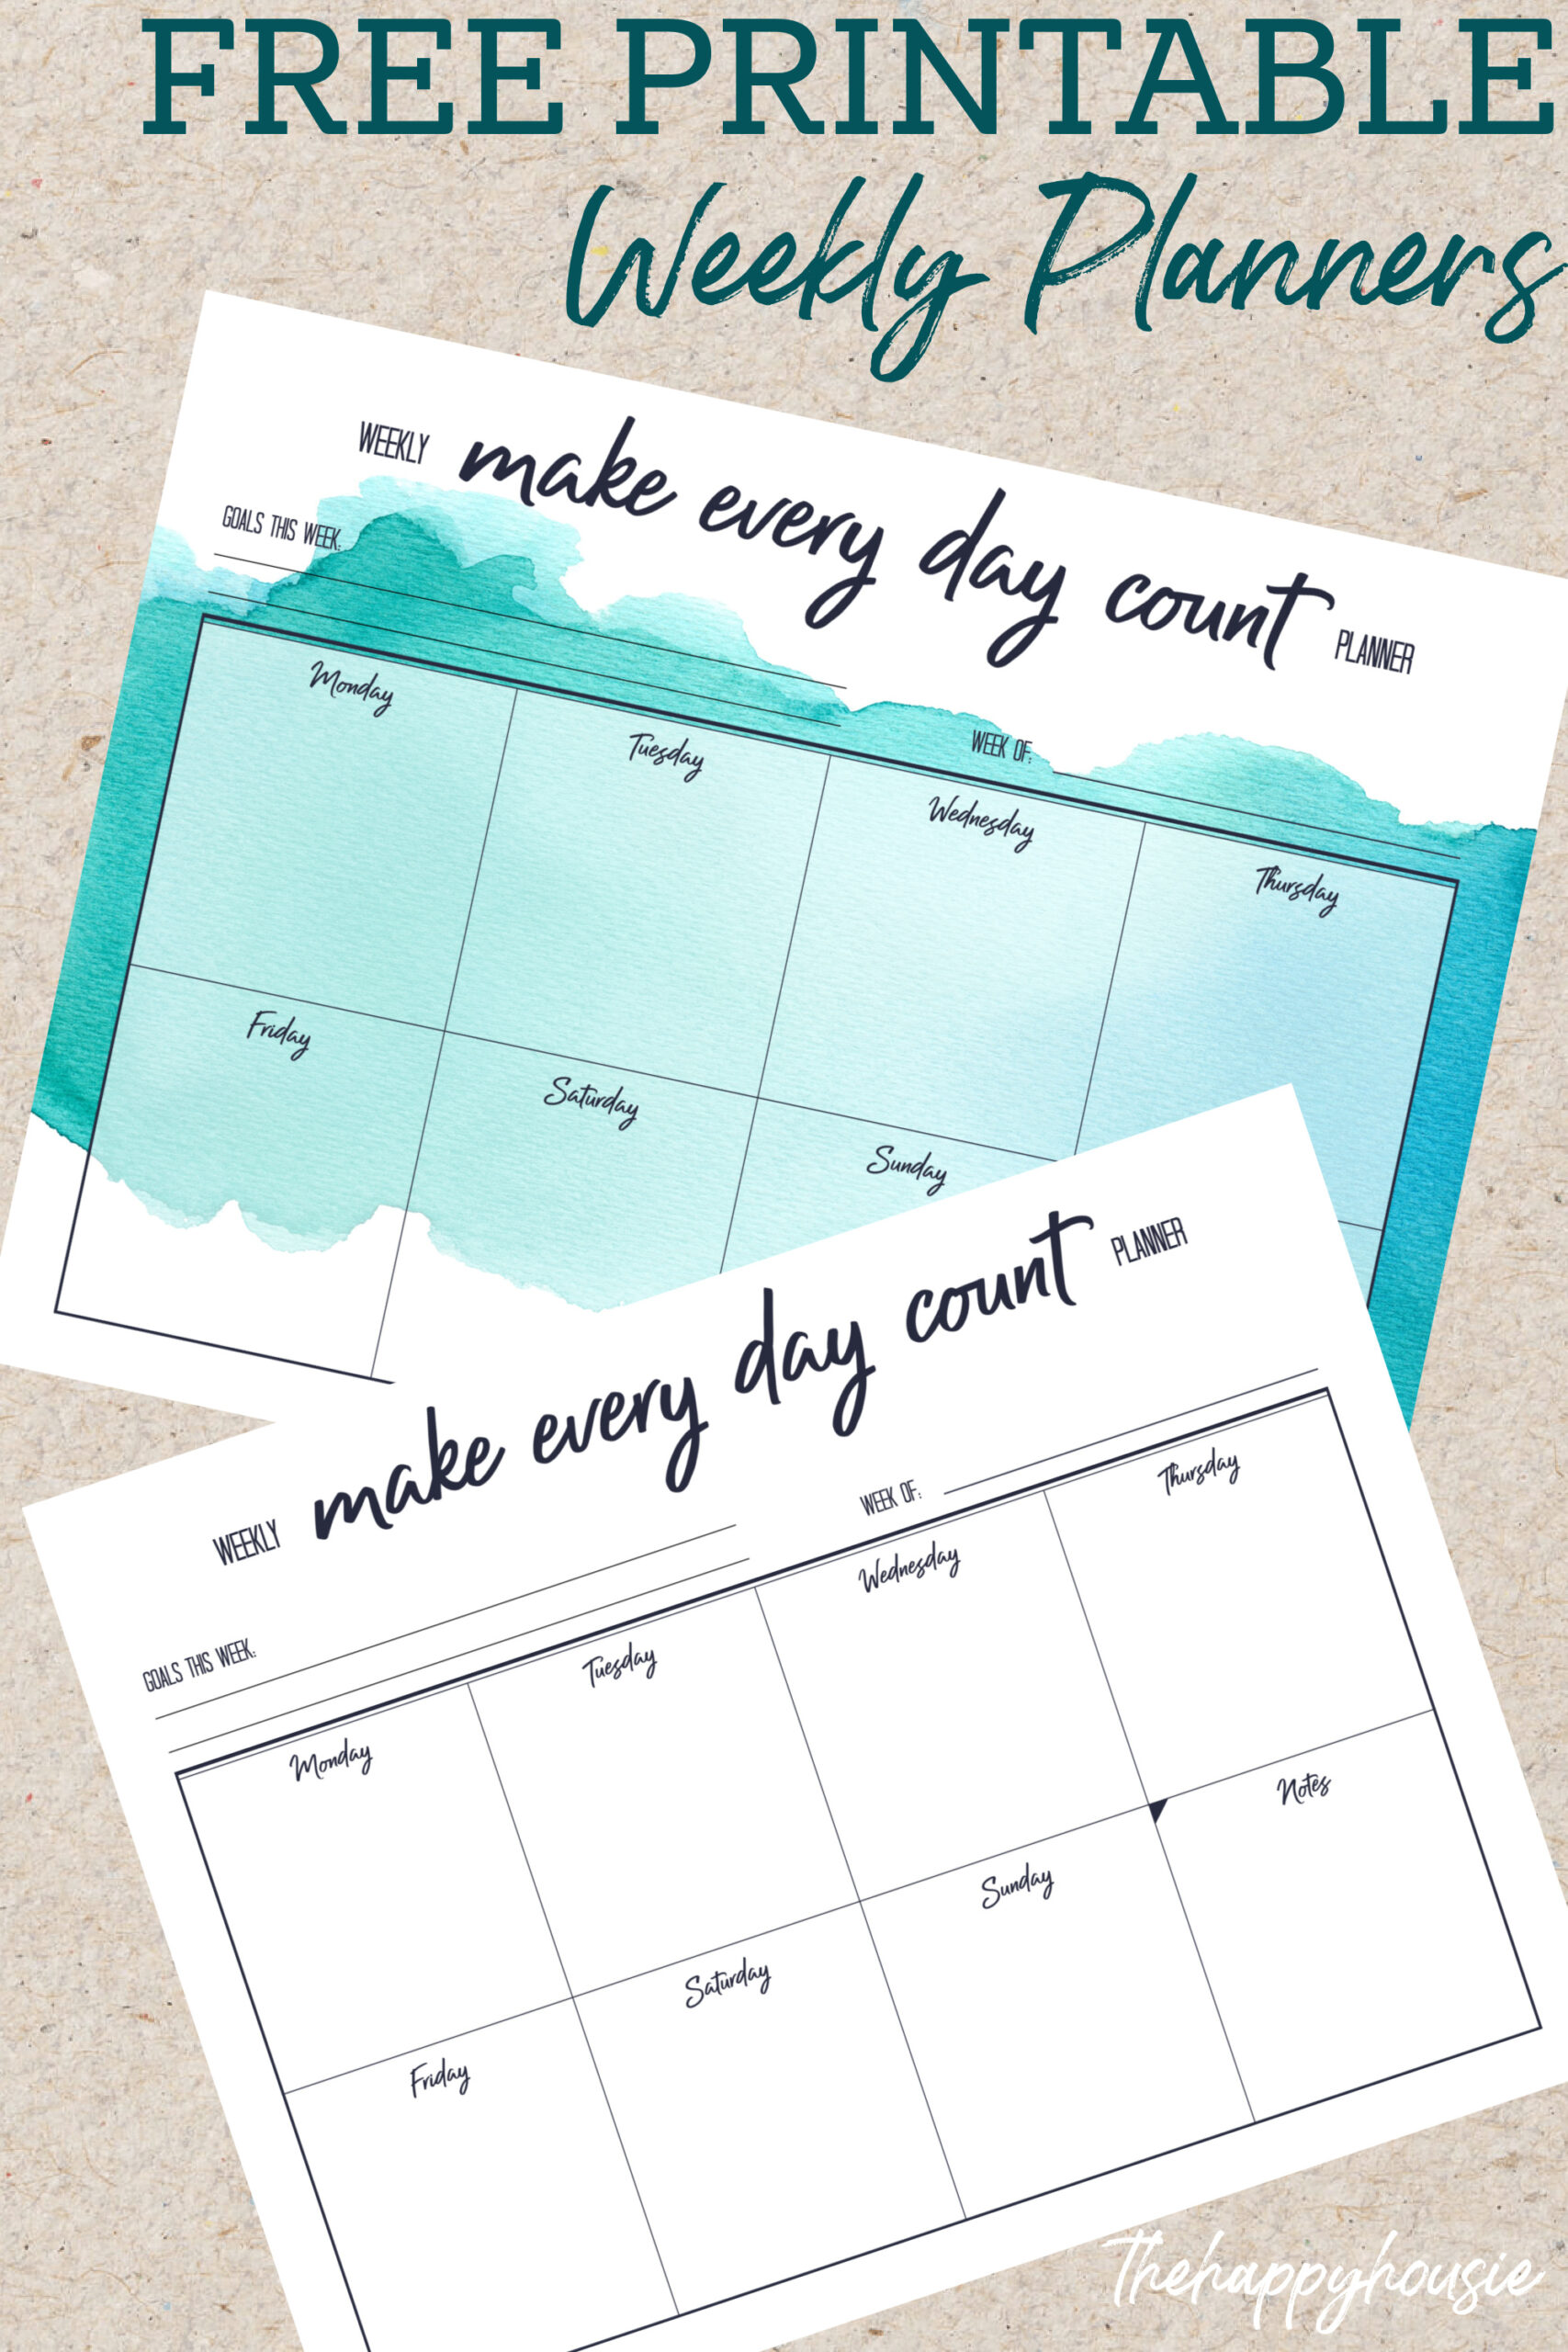 Free printable weekly planners on a neutral background